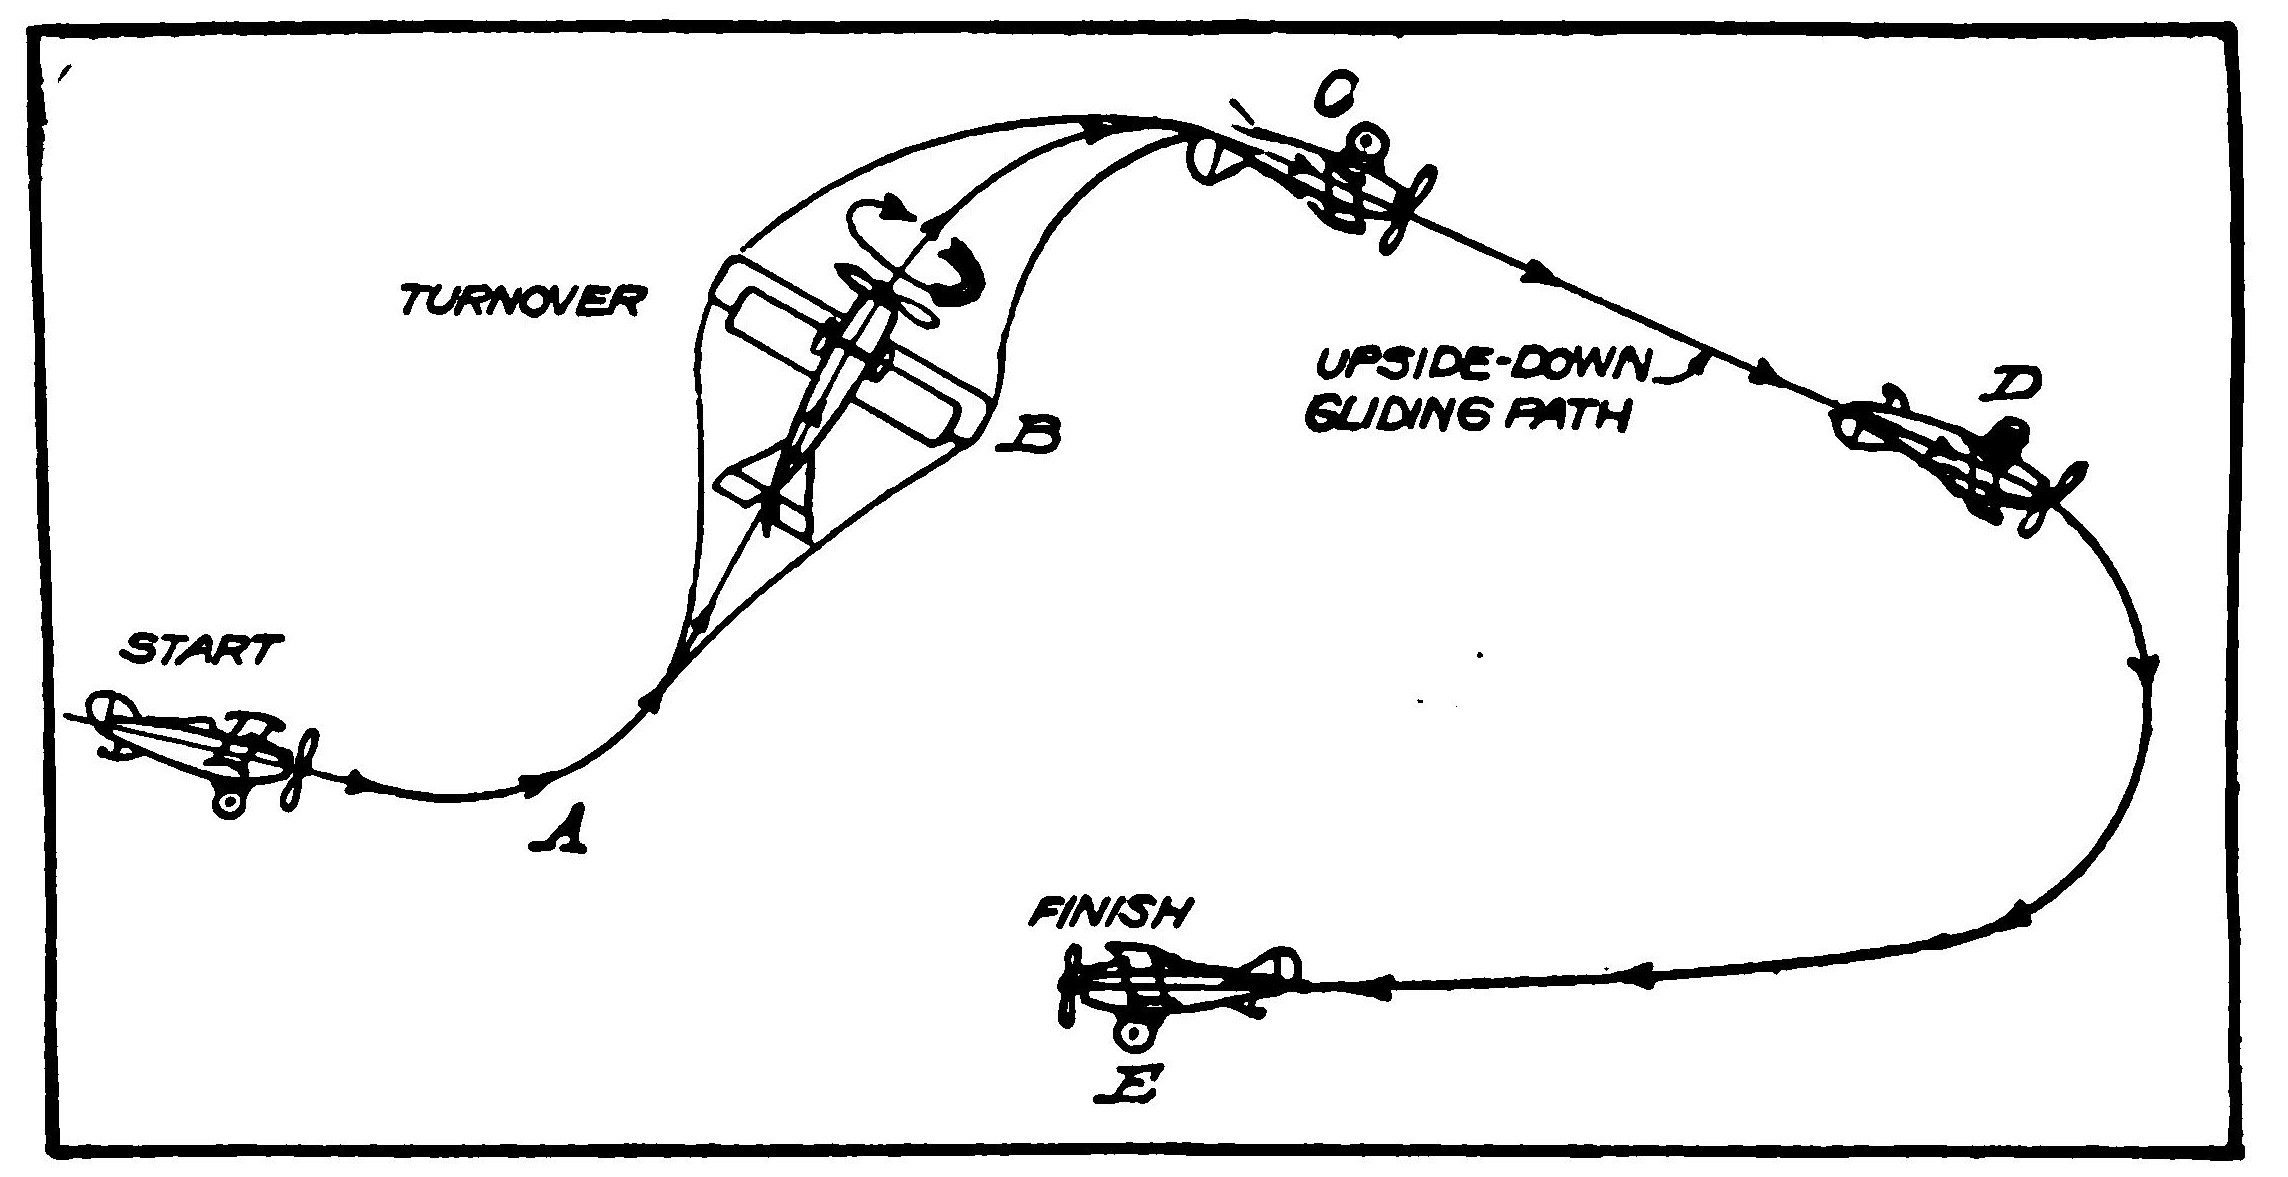 Upside Down Glide Diagram, Showing Successive Positions of Aeroplane.